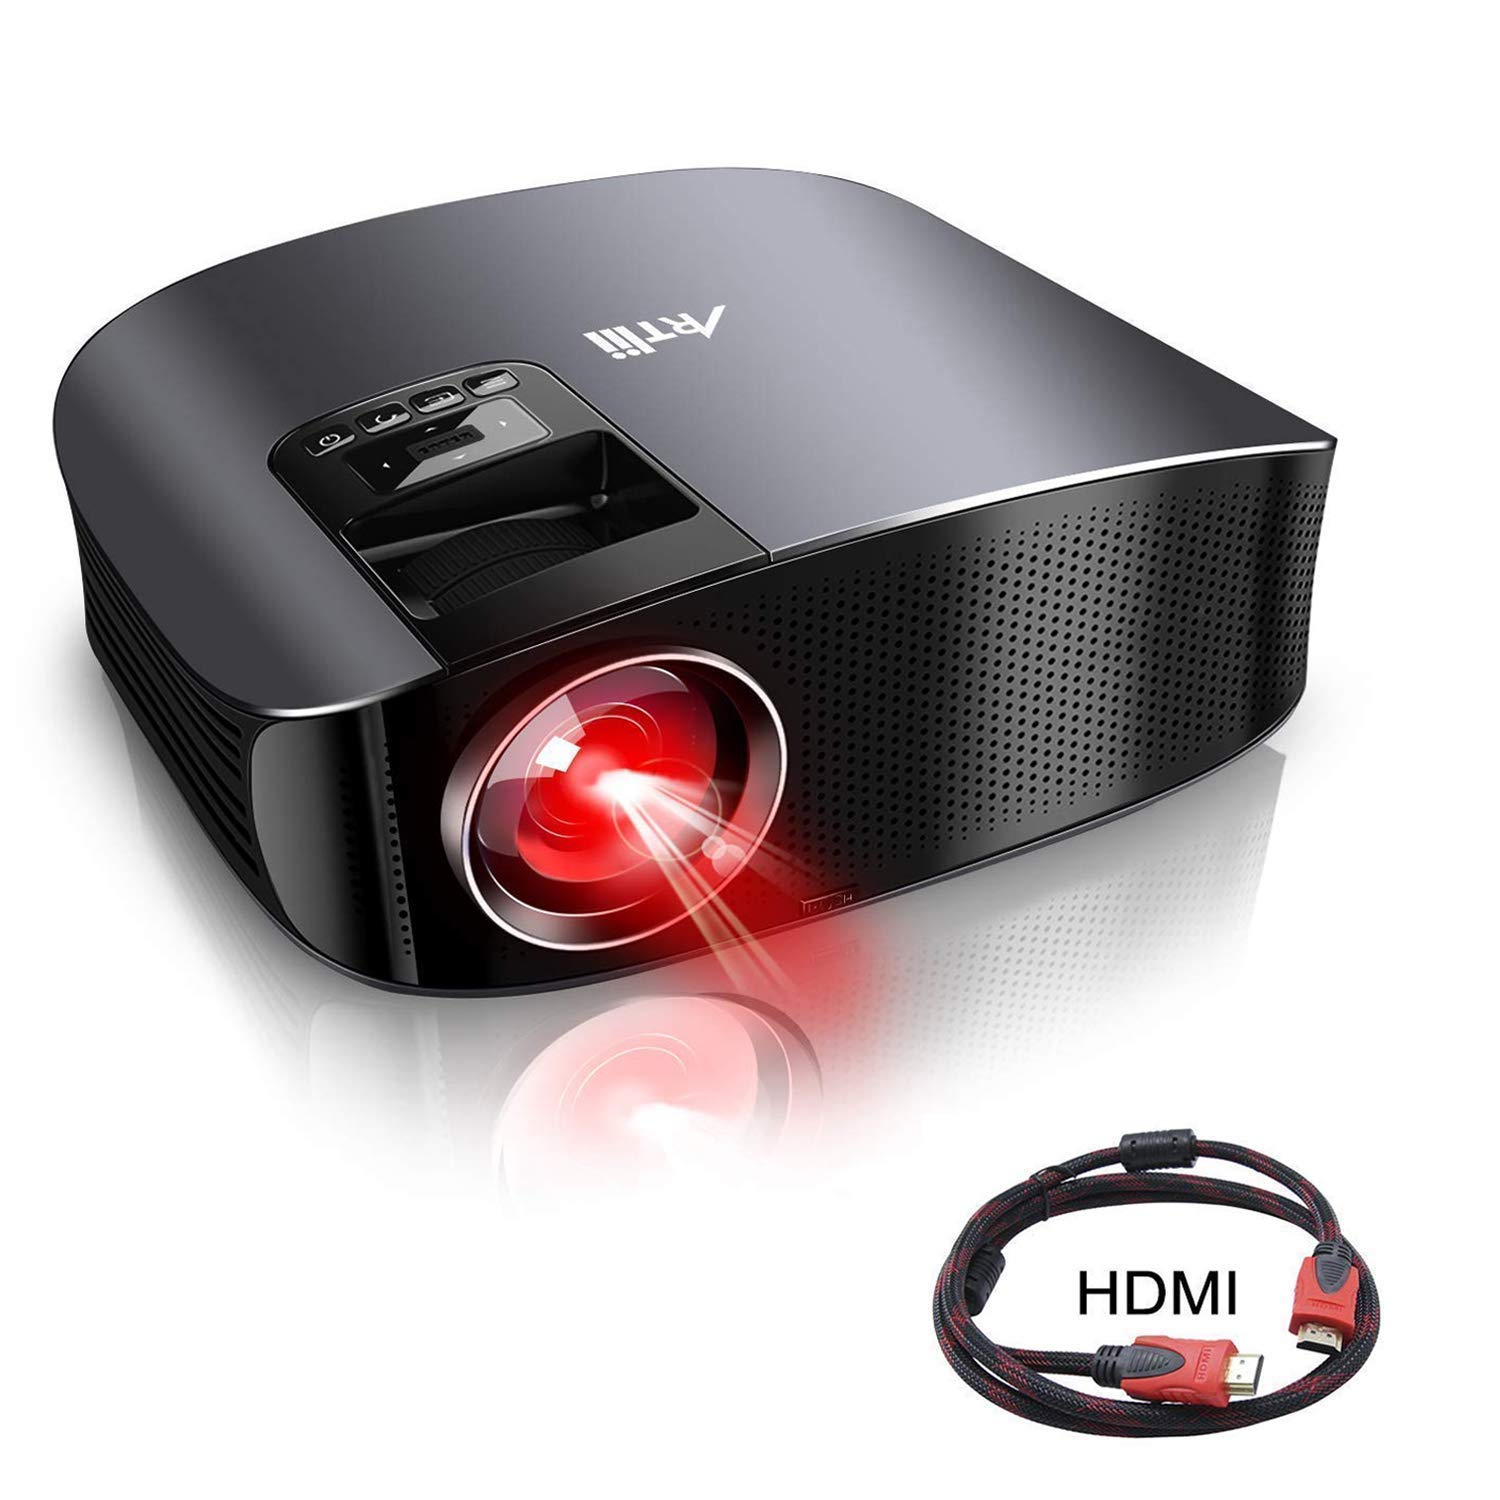 Movie Projector, Artlii 3600 Lux Full HD Projector with HiFi Stereo 200" Home Theater Projector with 2 HDMI USB VGA AV for Movies, Home Cinema, Sports and Games